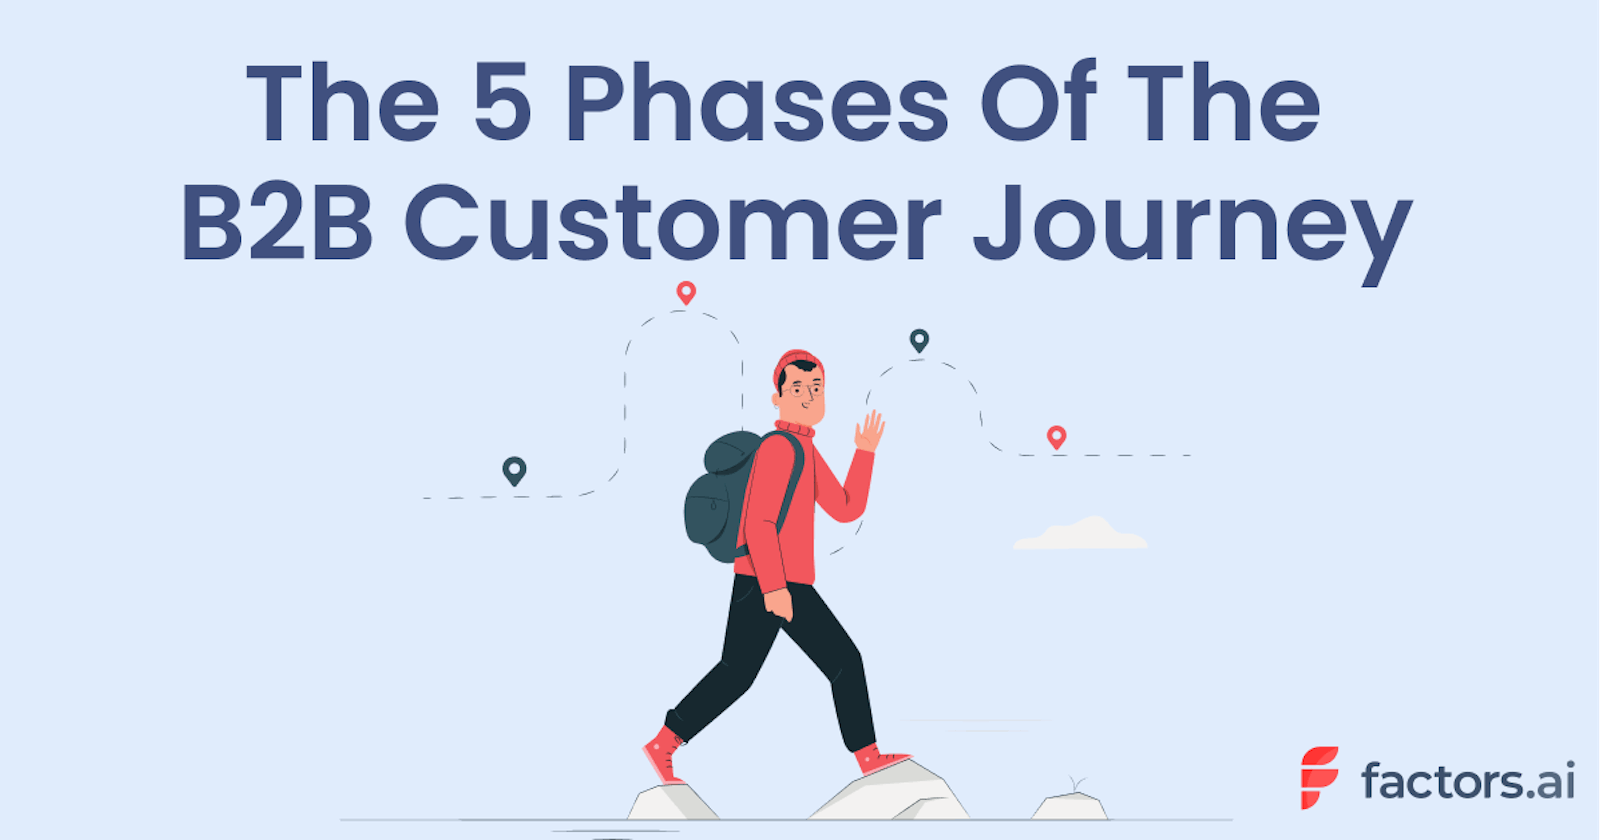 The 5 B2B customer journey phases: How to provide value along each step